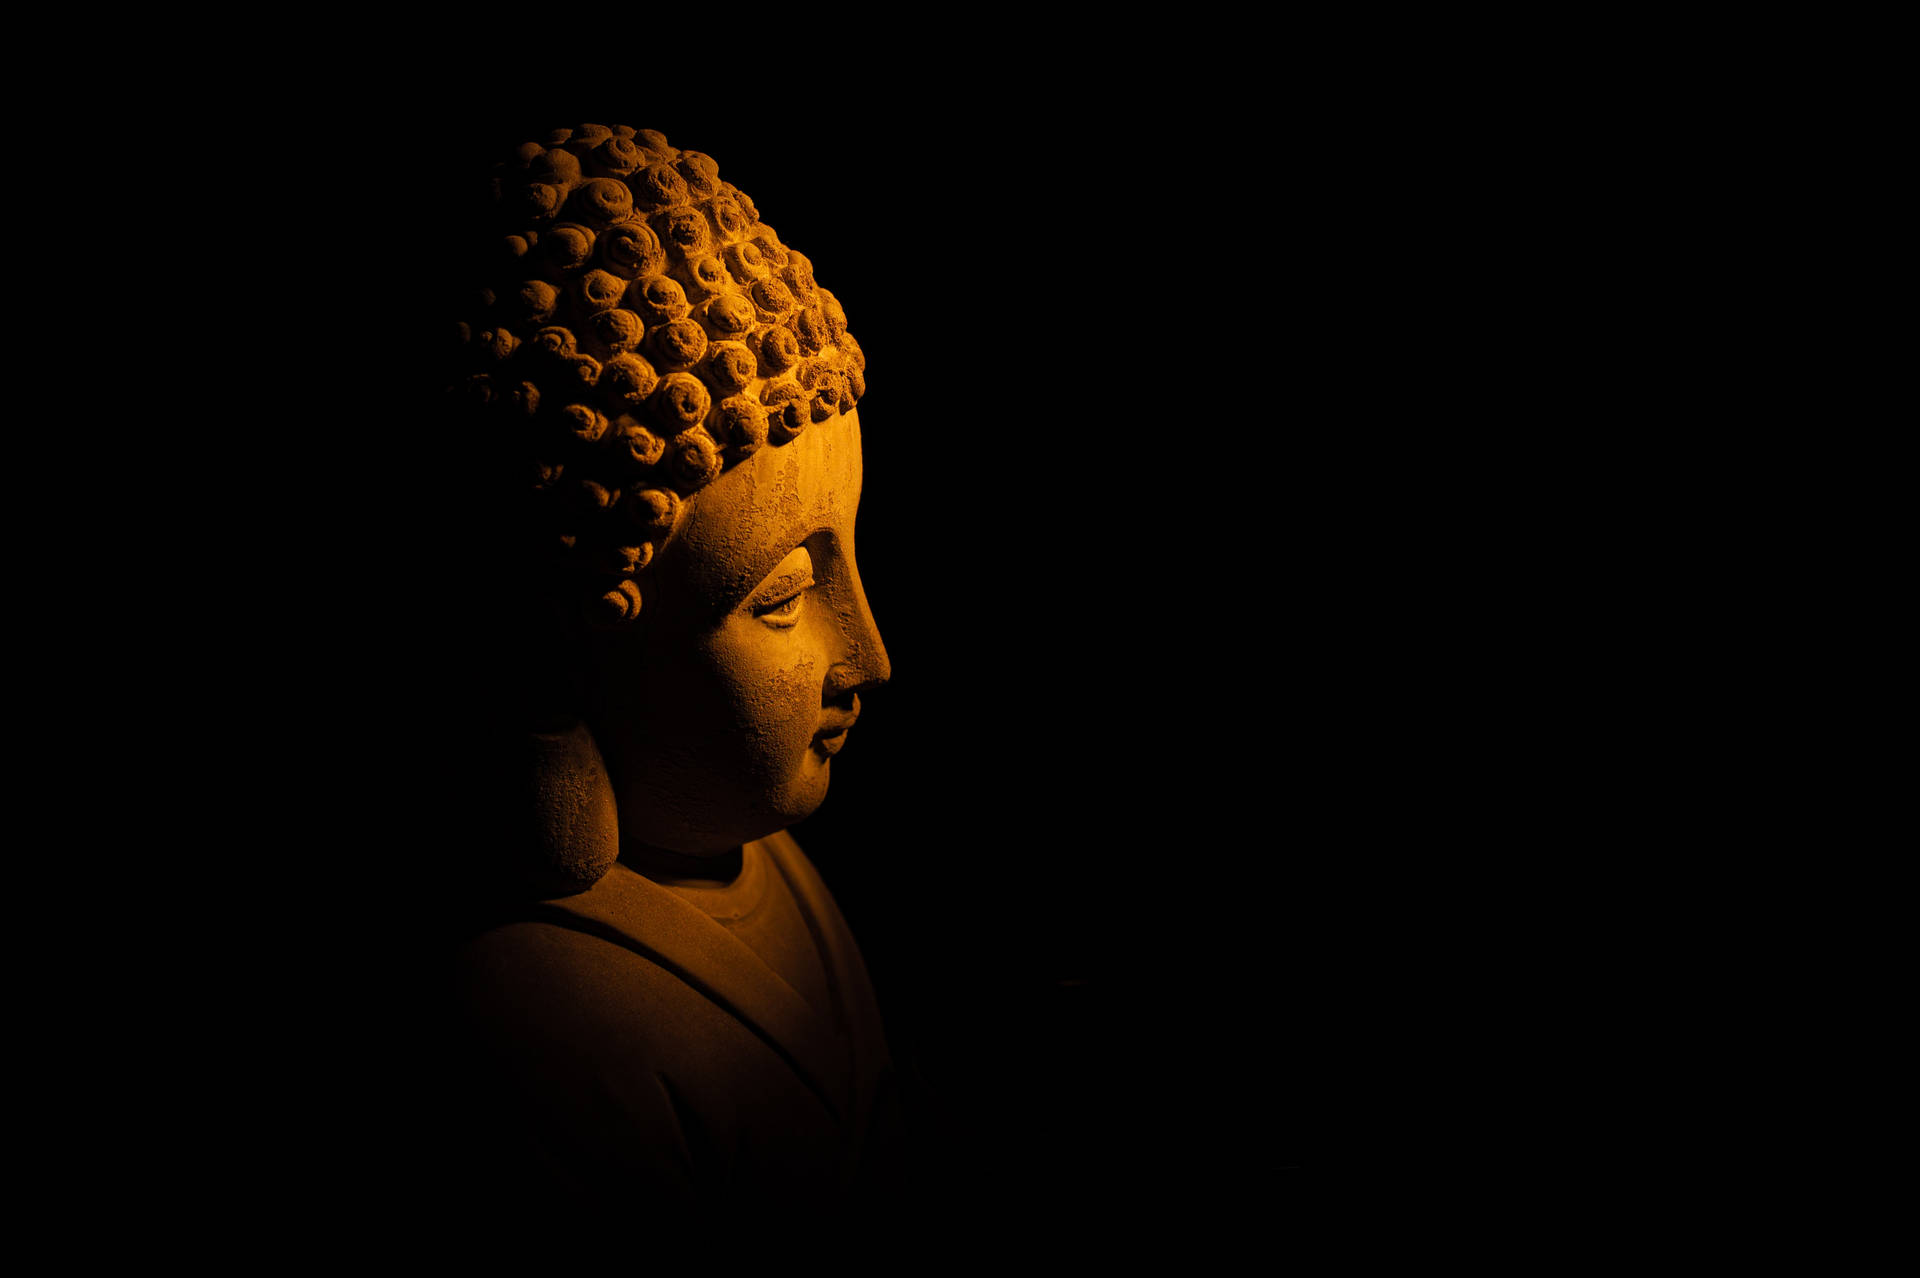 Buddha Wallpaper Stock Photos, Images and Backgrounds for Free Download